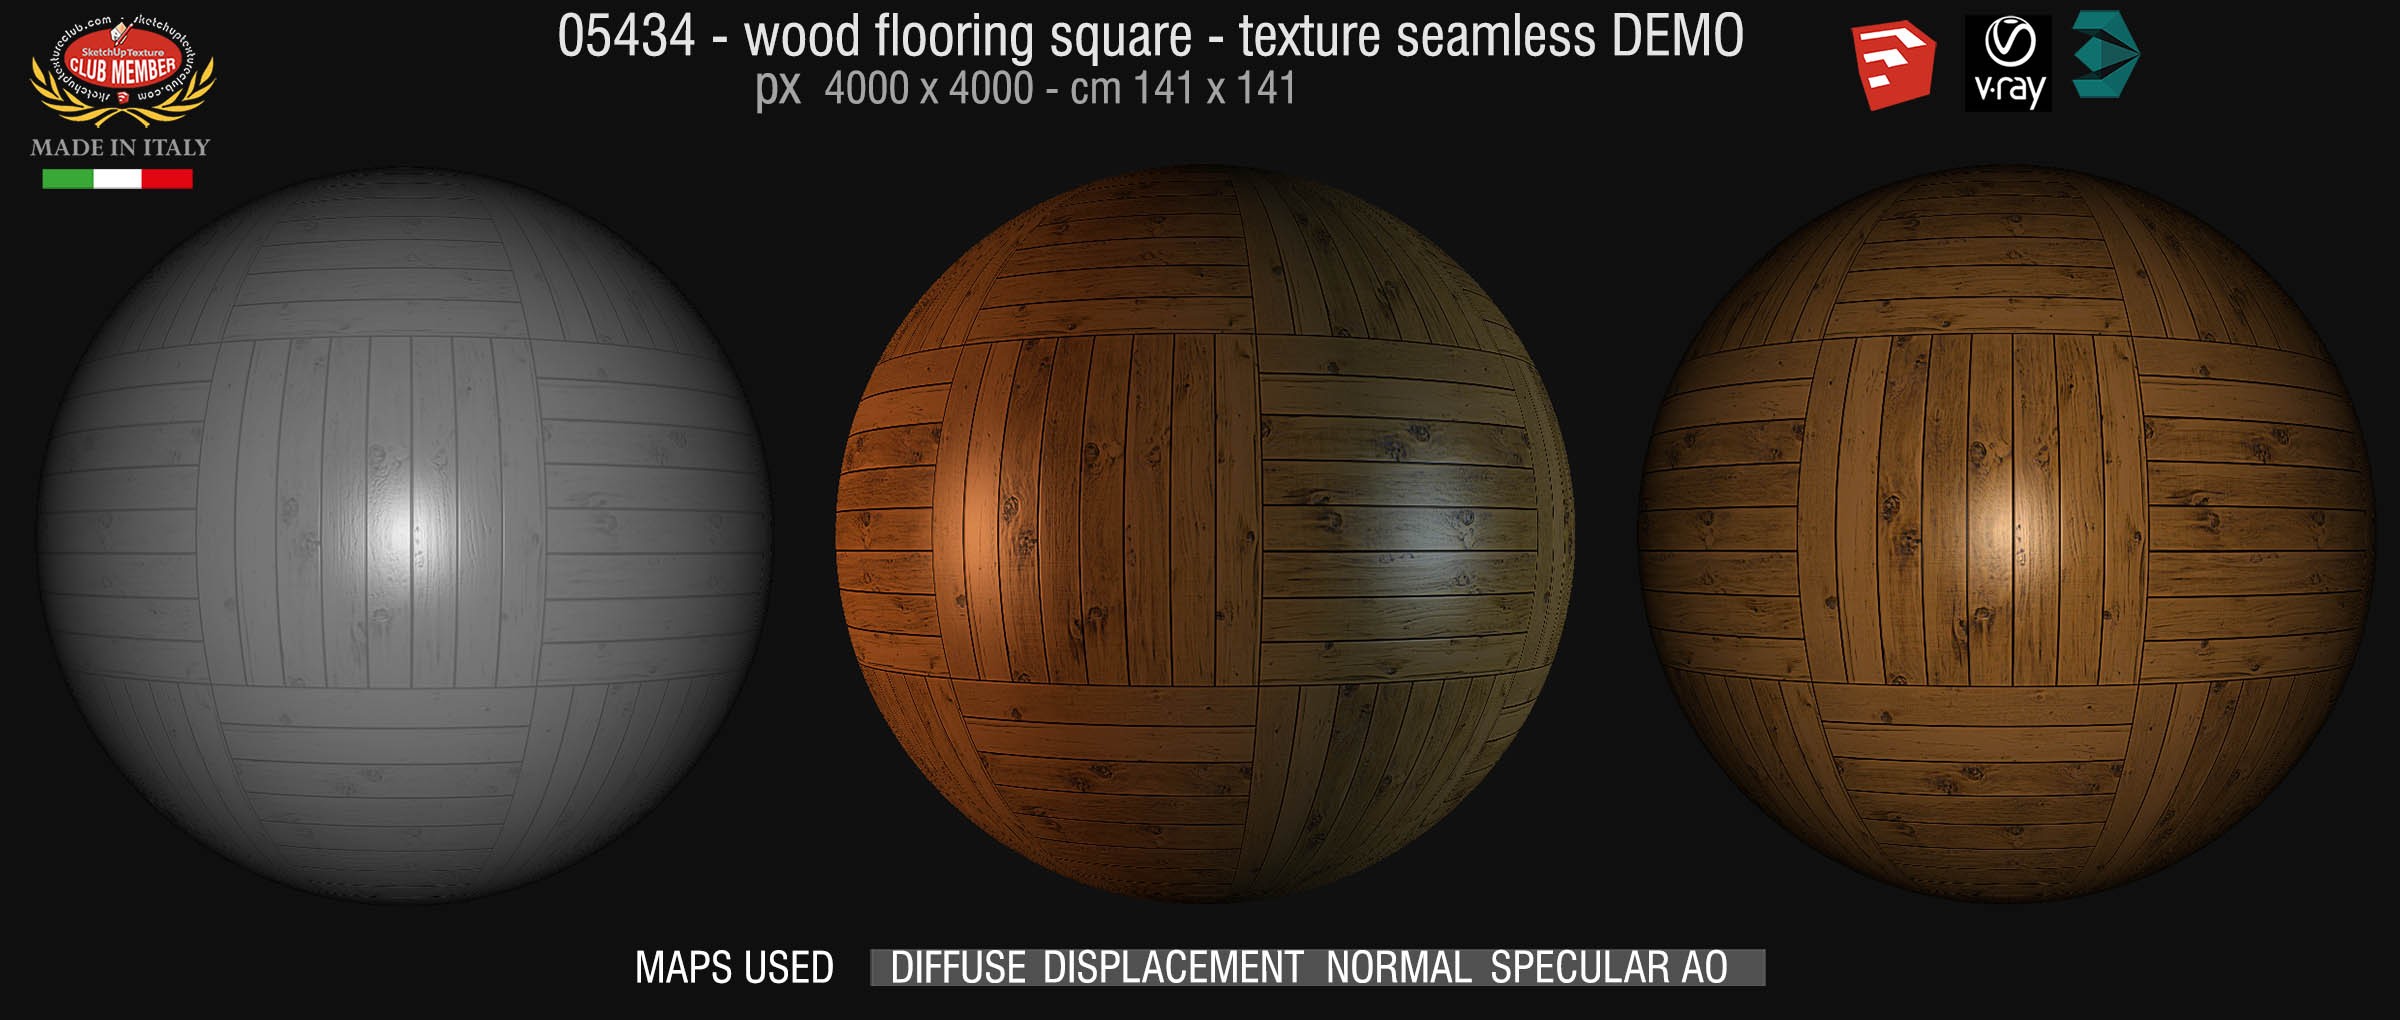 05434 Wood flooring square texture seamless + maps DEMO